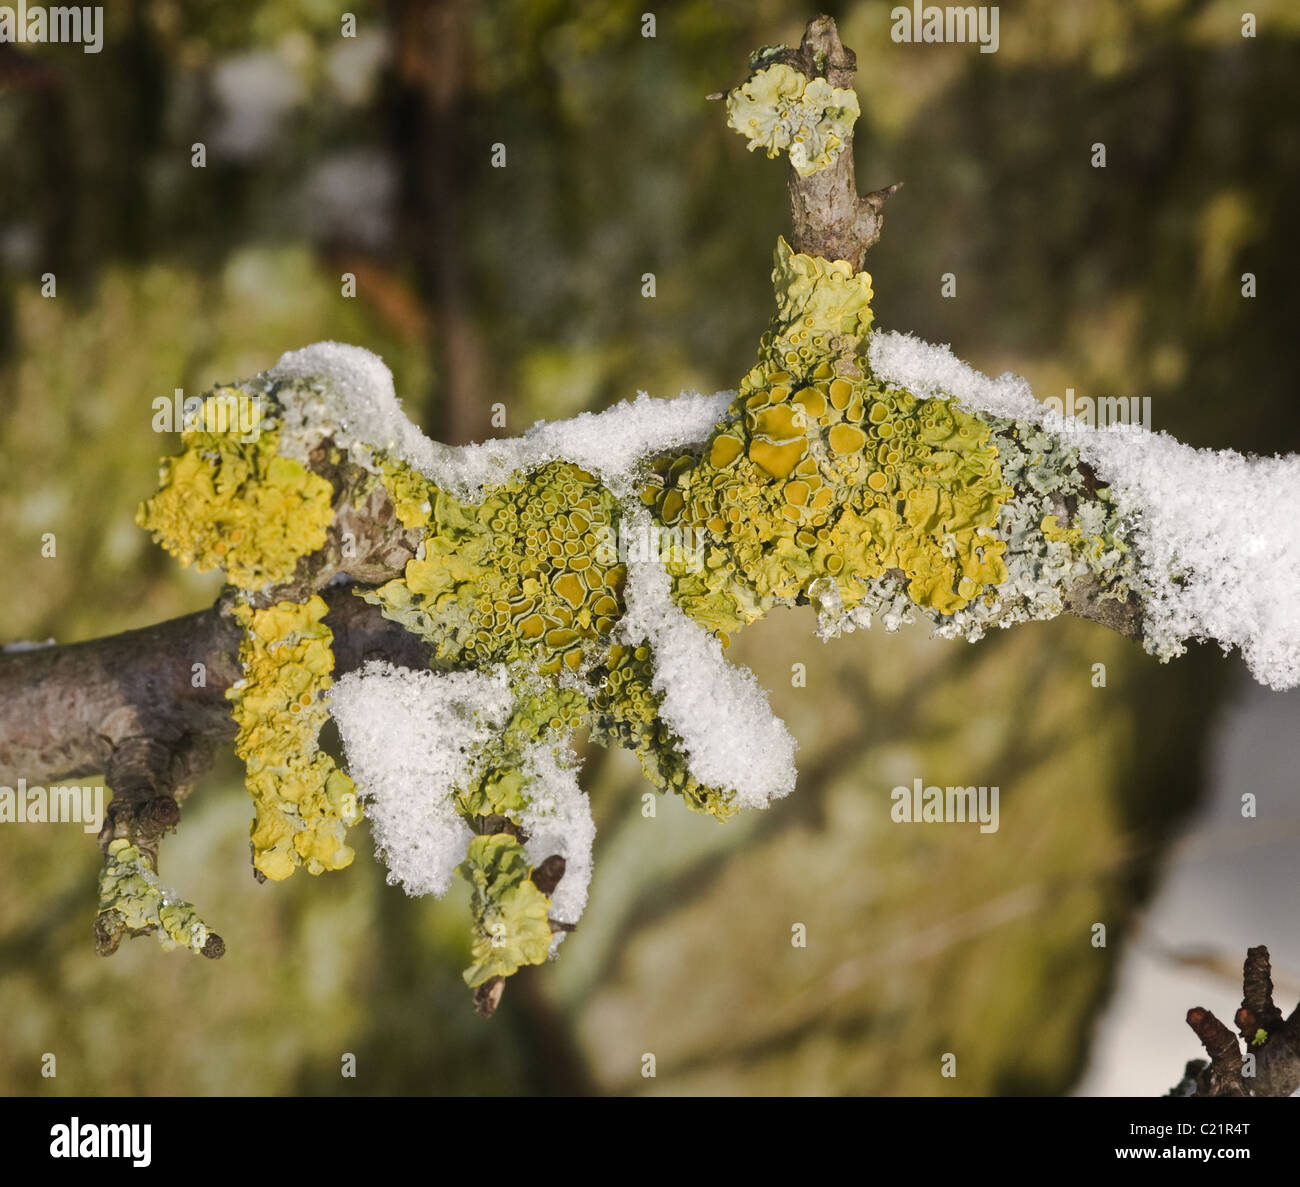 Xanthoria parietina Common Yellow Lichen growing on a small tree branch alongside other lichens Stock Photo